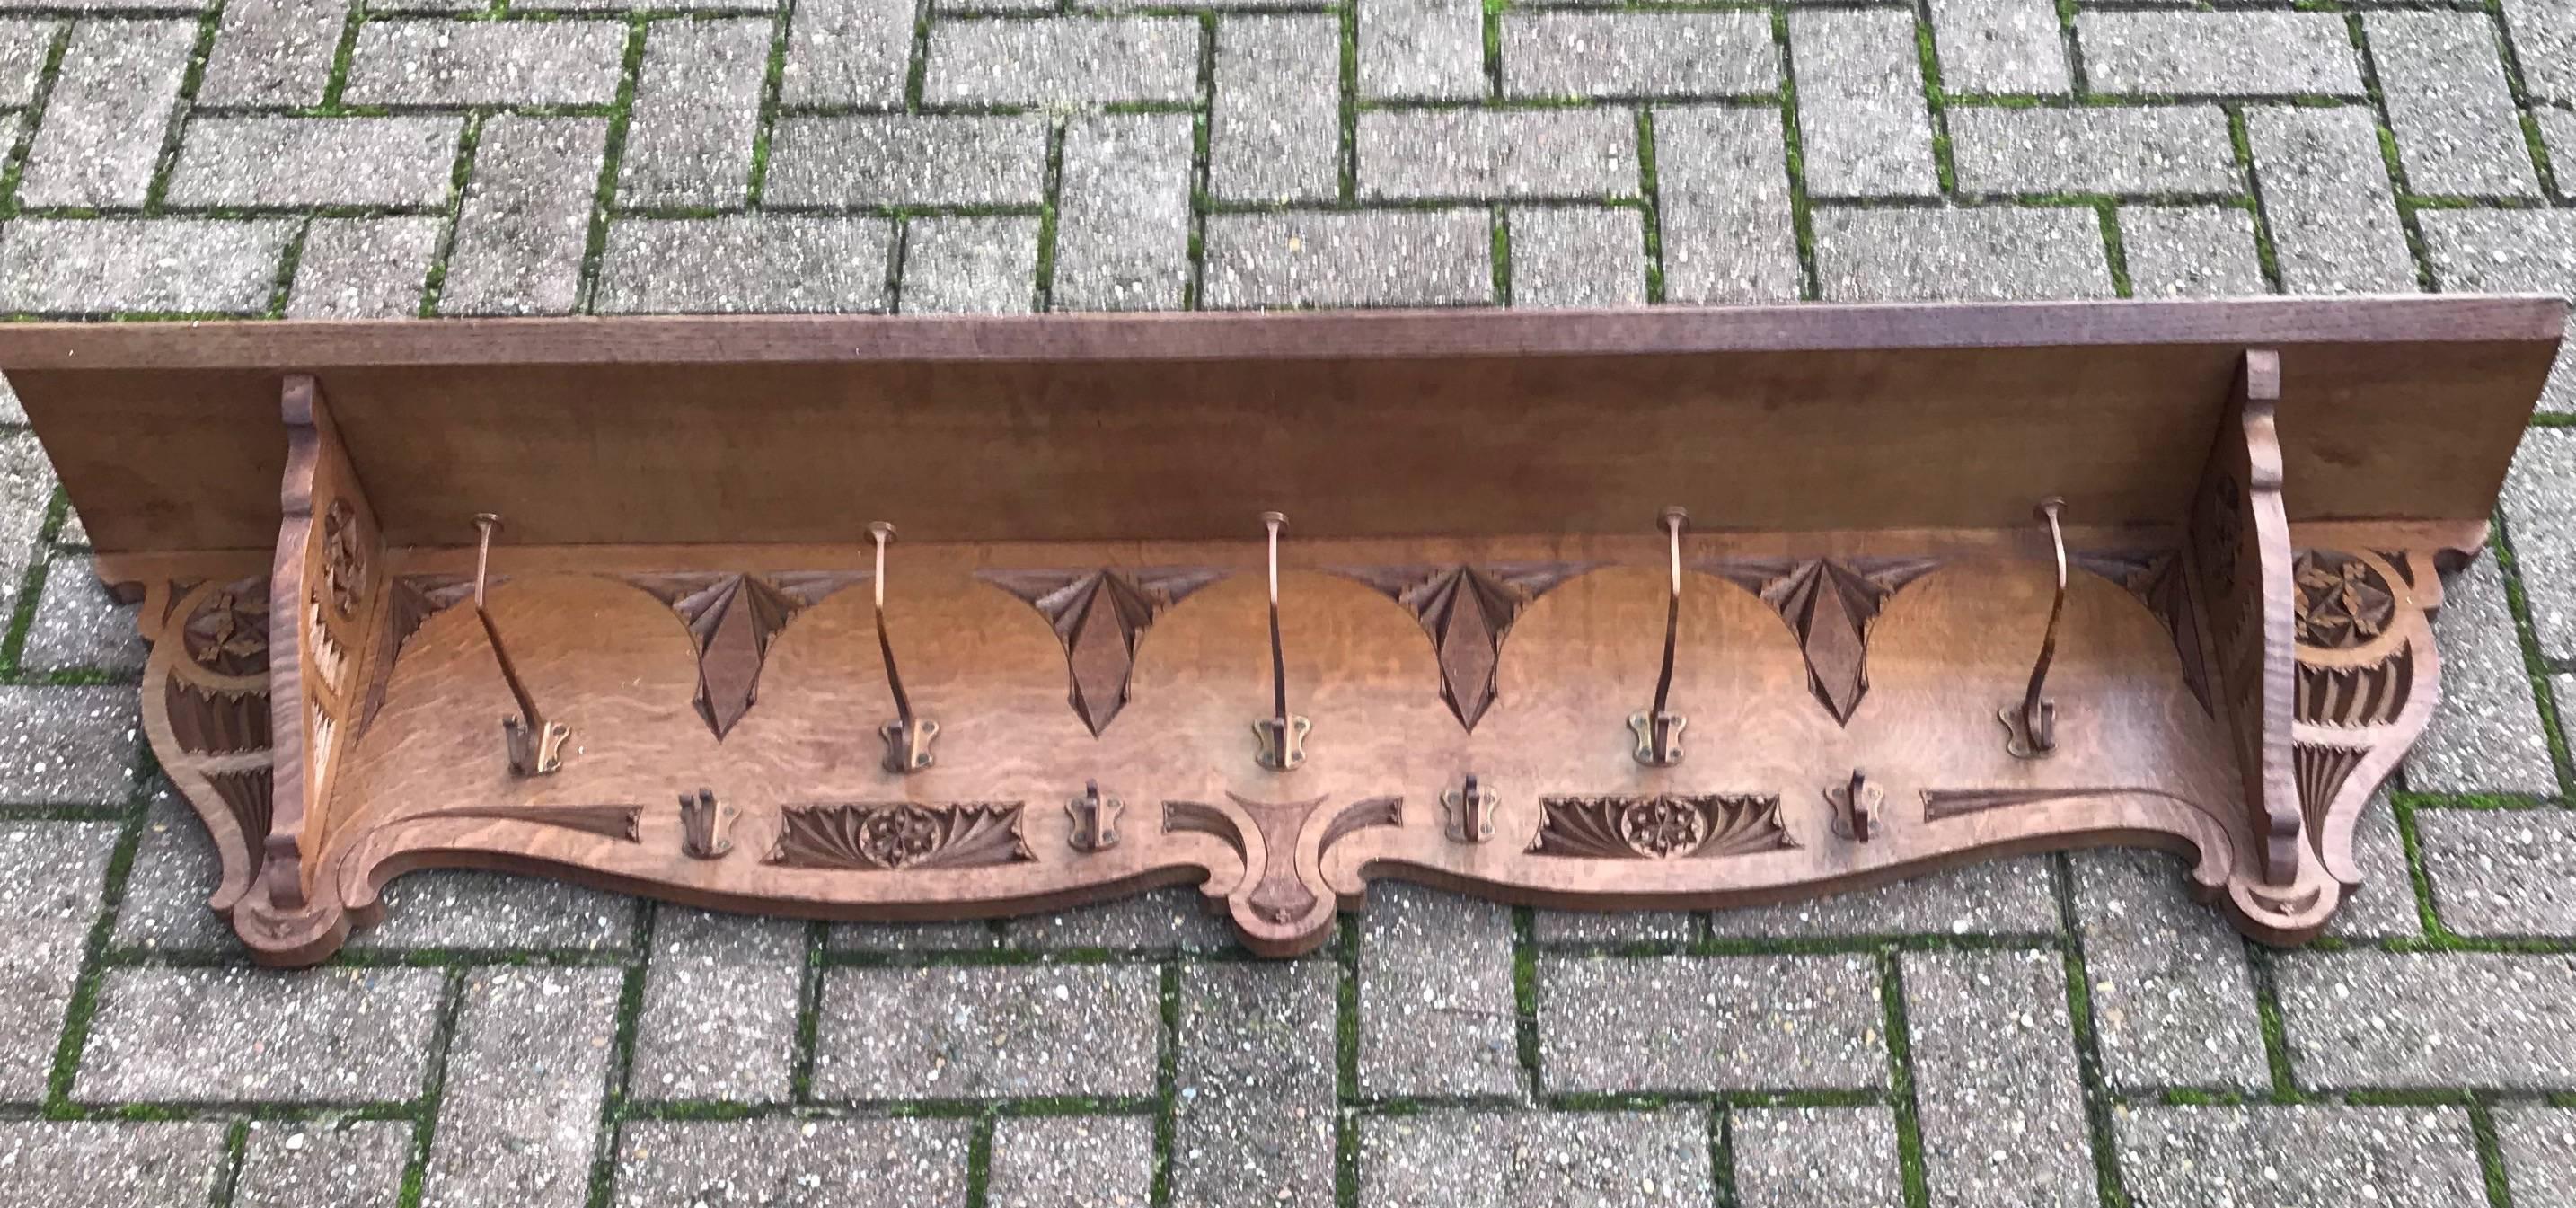 Stylish and beautifully hand-carved, Arts & Crafts coat rack.

Another one of our recent great finds is this very large and exquisite wall coat rack. The wonderful patina and the perfectly hand-carved details are an absolute joy to look at, time and